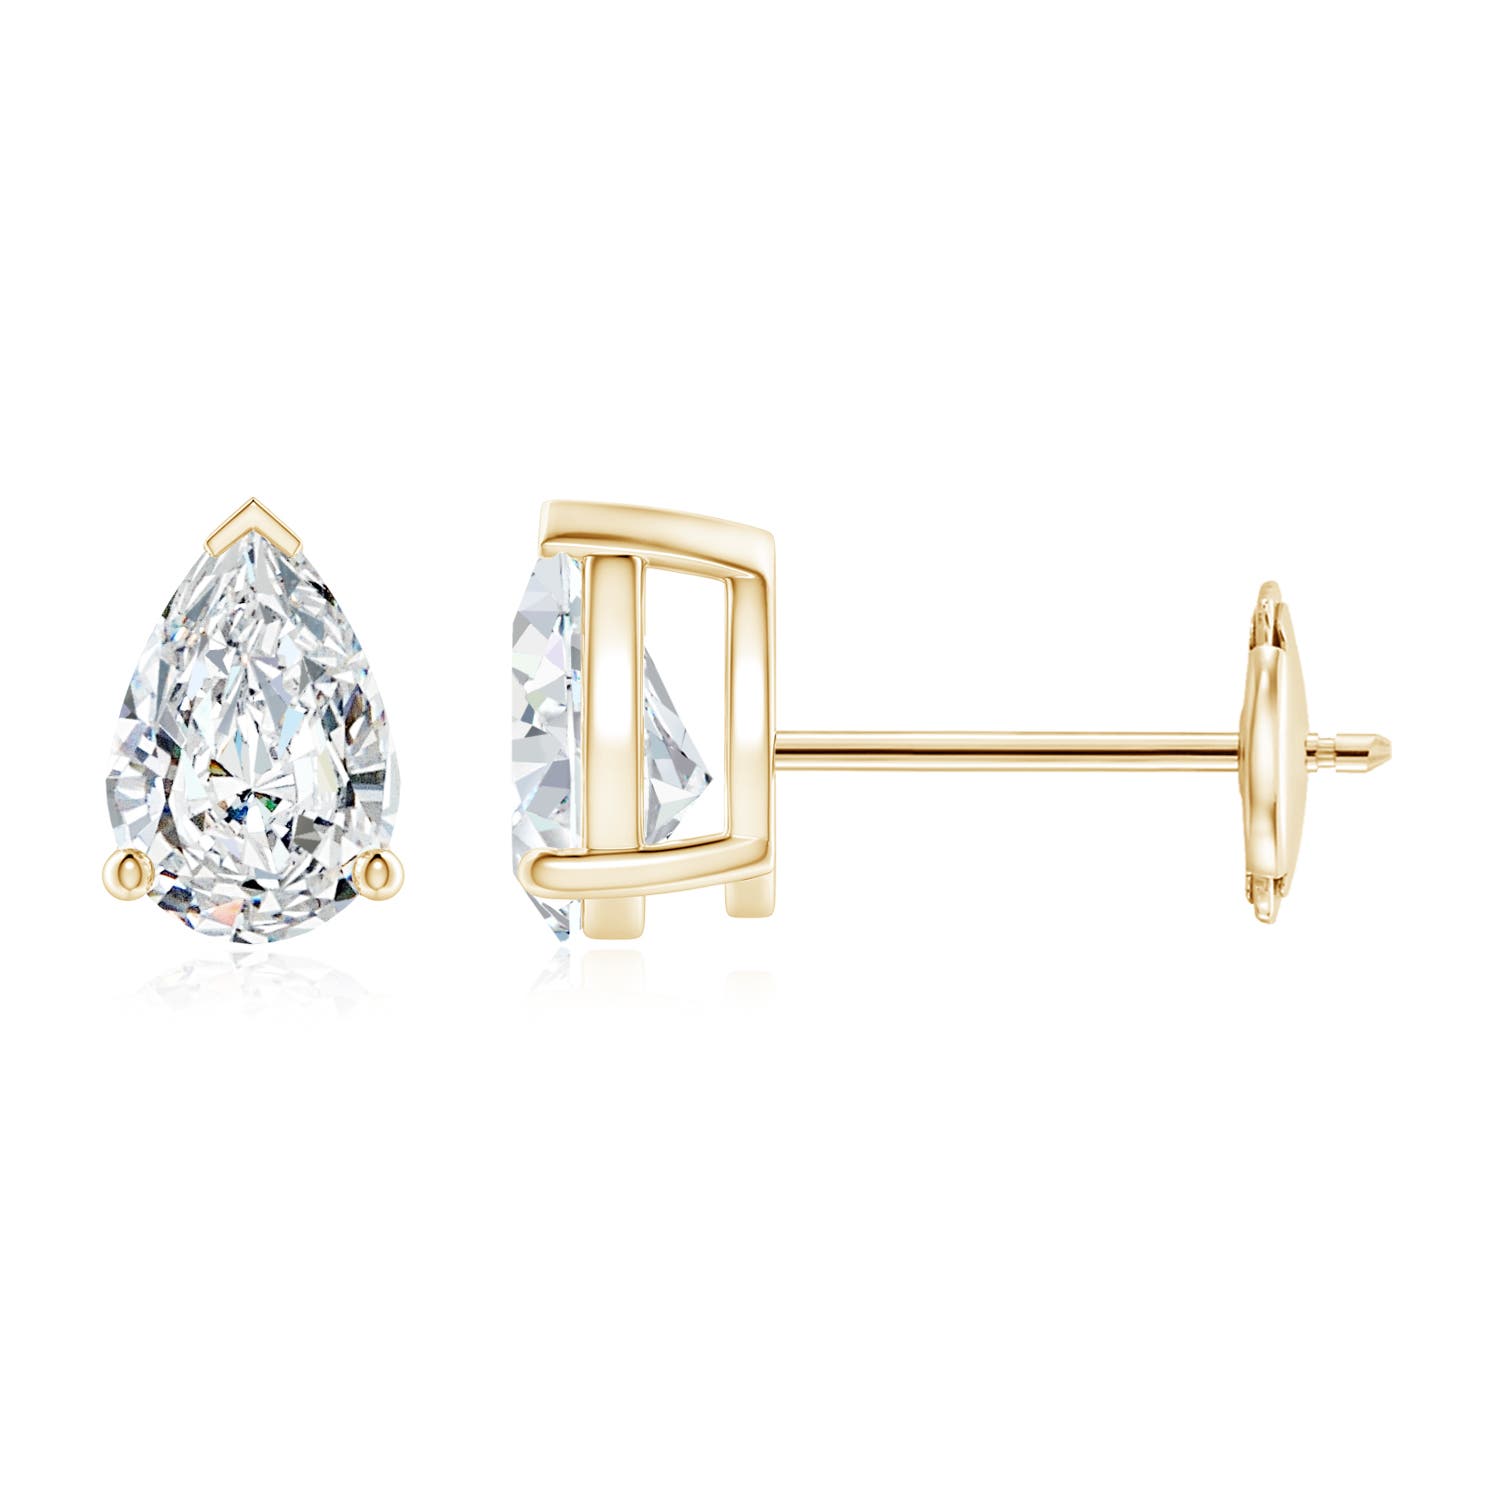 GVS2 / 0.8 CT / 14 KT Yellow Gold